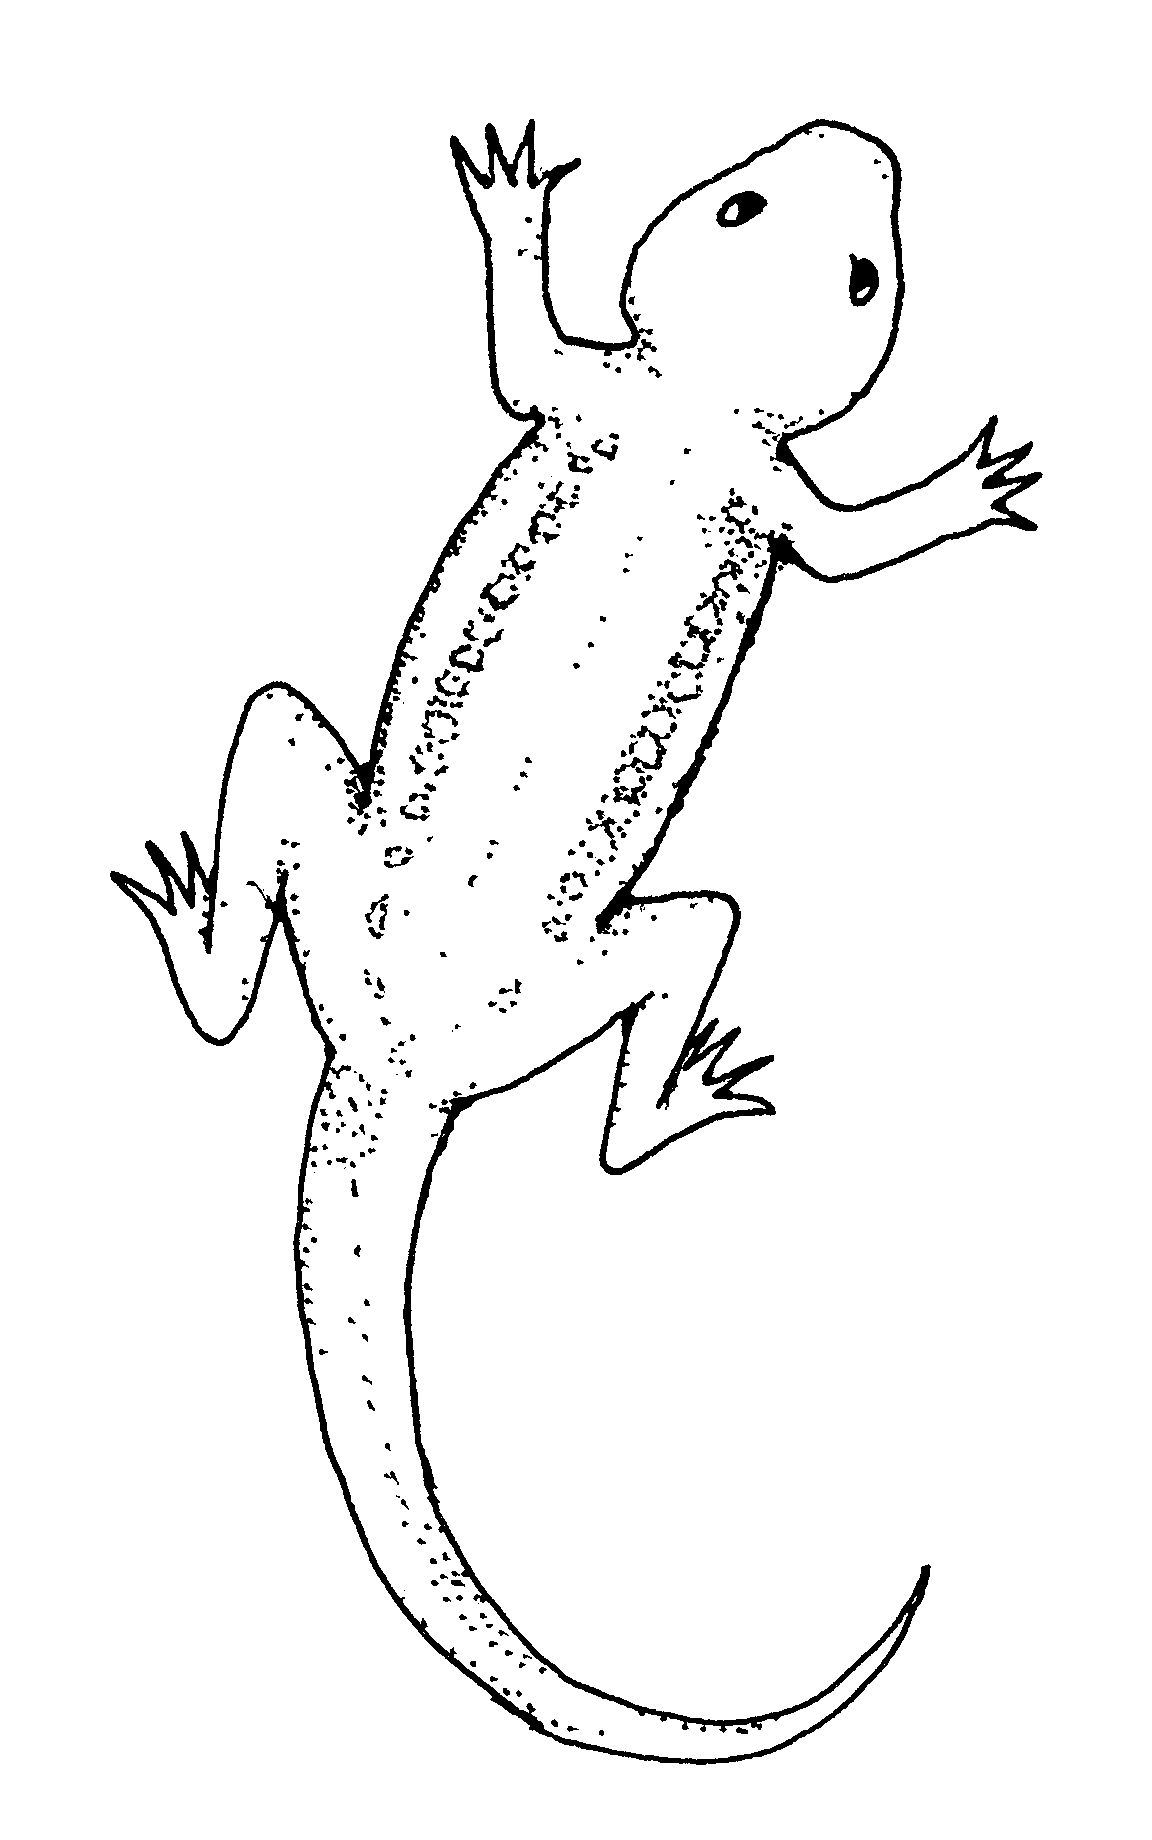 Free Iguana Clipart Black And White, Download Free Iguana Clipart Black ...